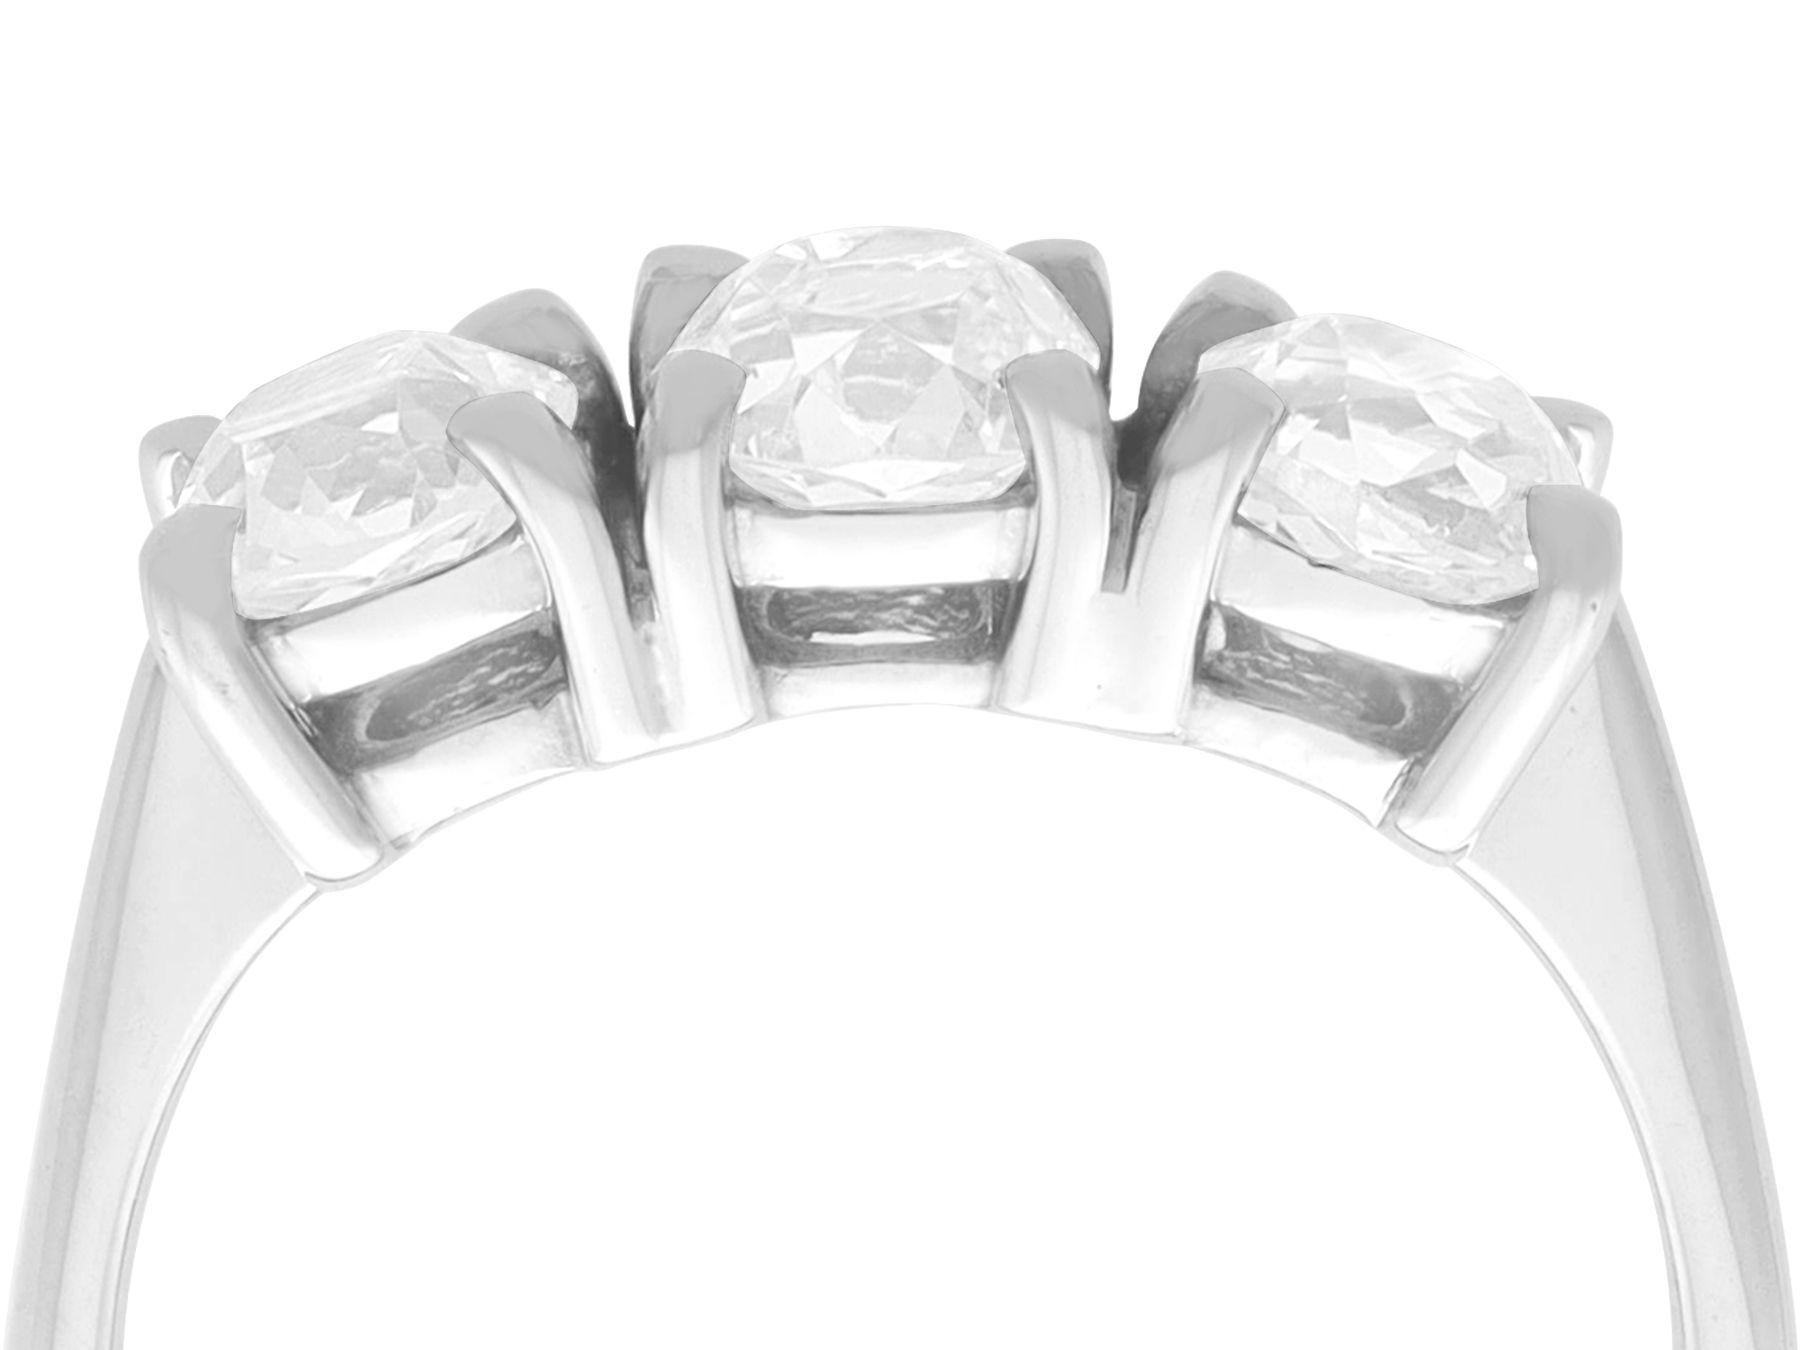 A stunning, fine and impressive 1.73 carat diamond and 18 karat white gold trilogy ring; part of our diverse diamond jewellery and estate jewelry collections.

This impressive trilogy diamond ring has been crafted in 18k white gold.

The